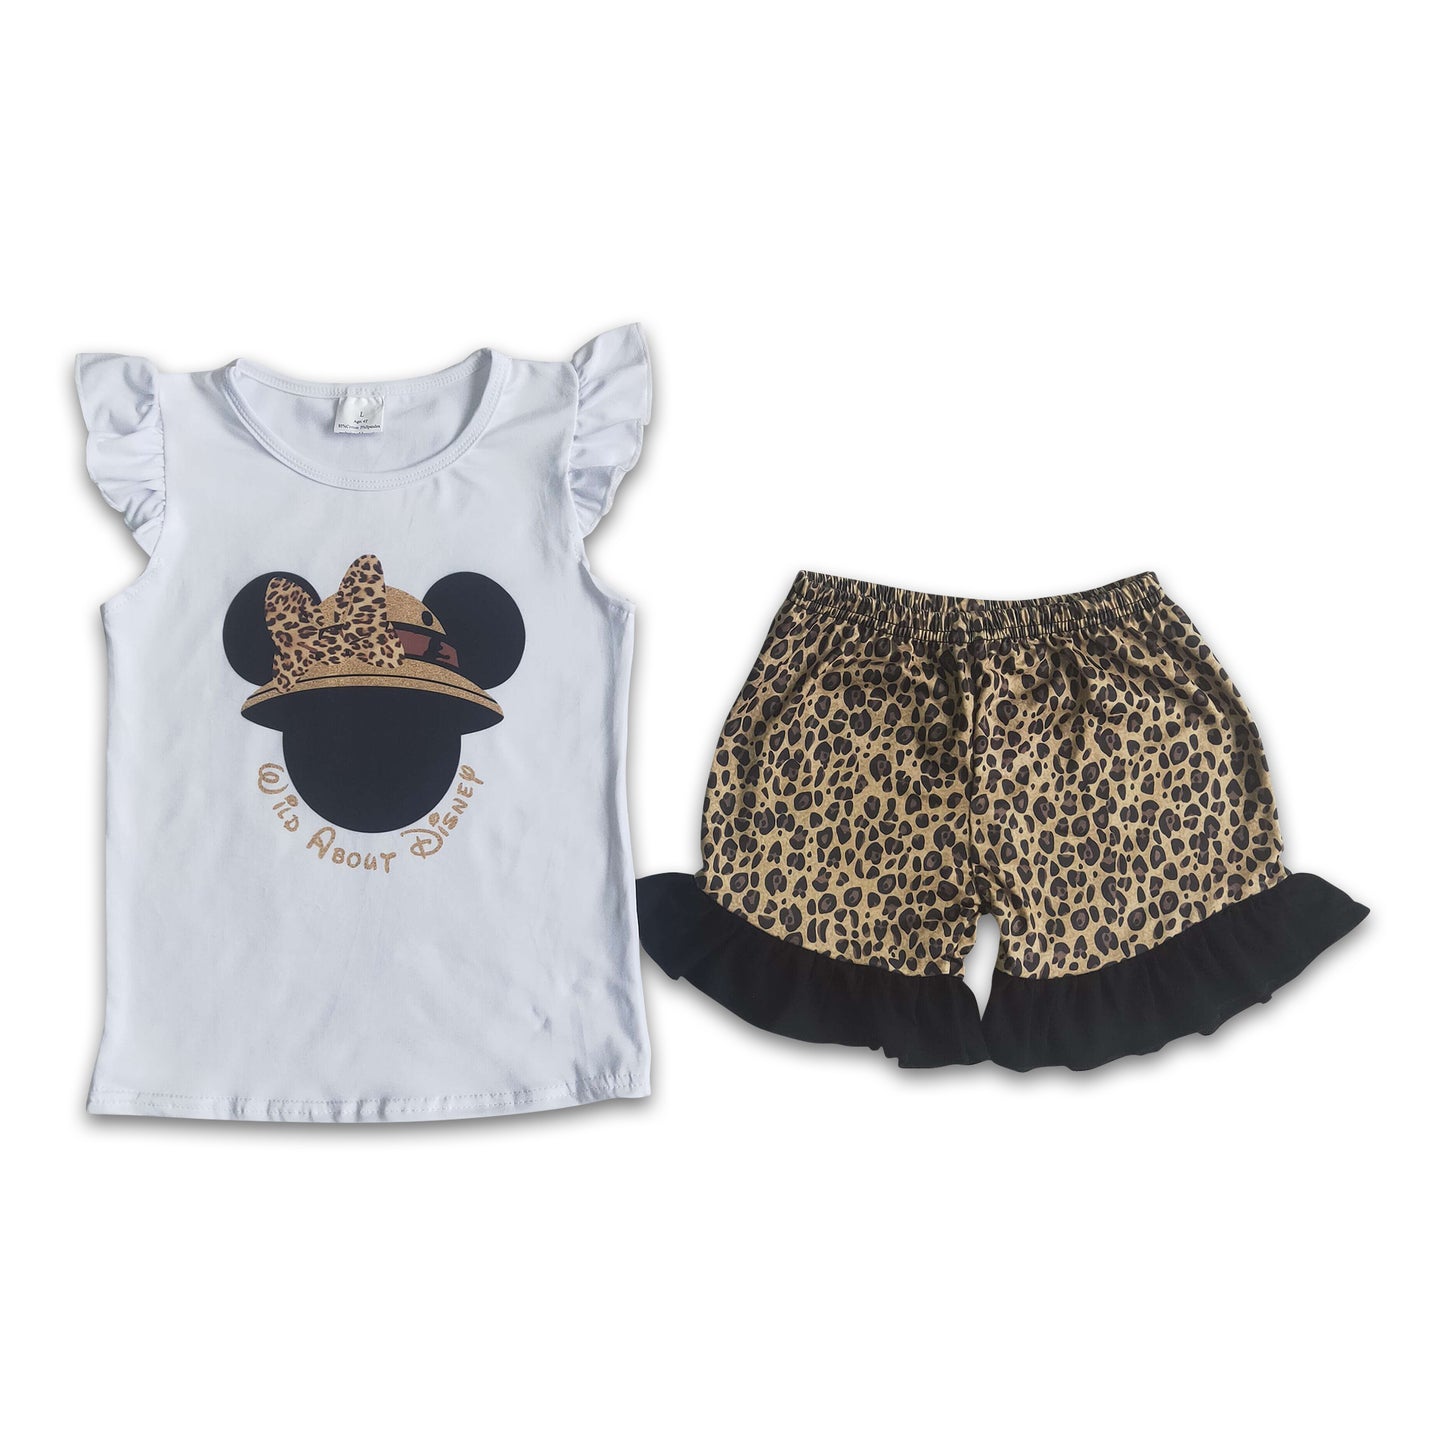 Wild leopard mouse girls boutique summer clothing